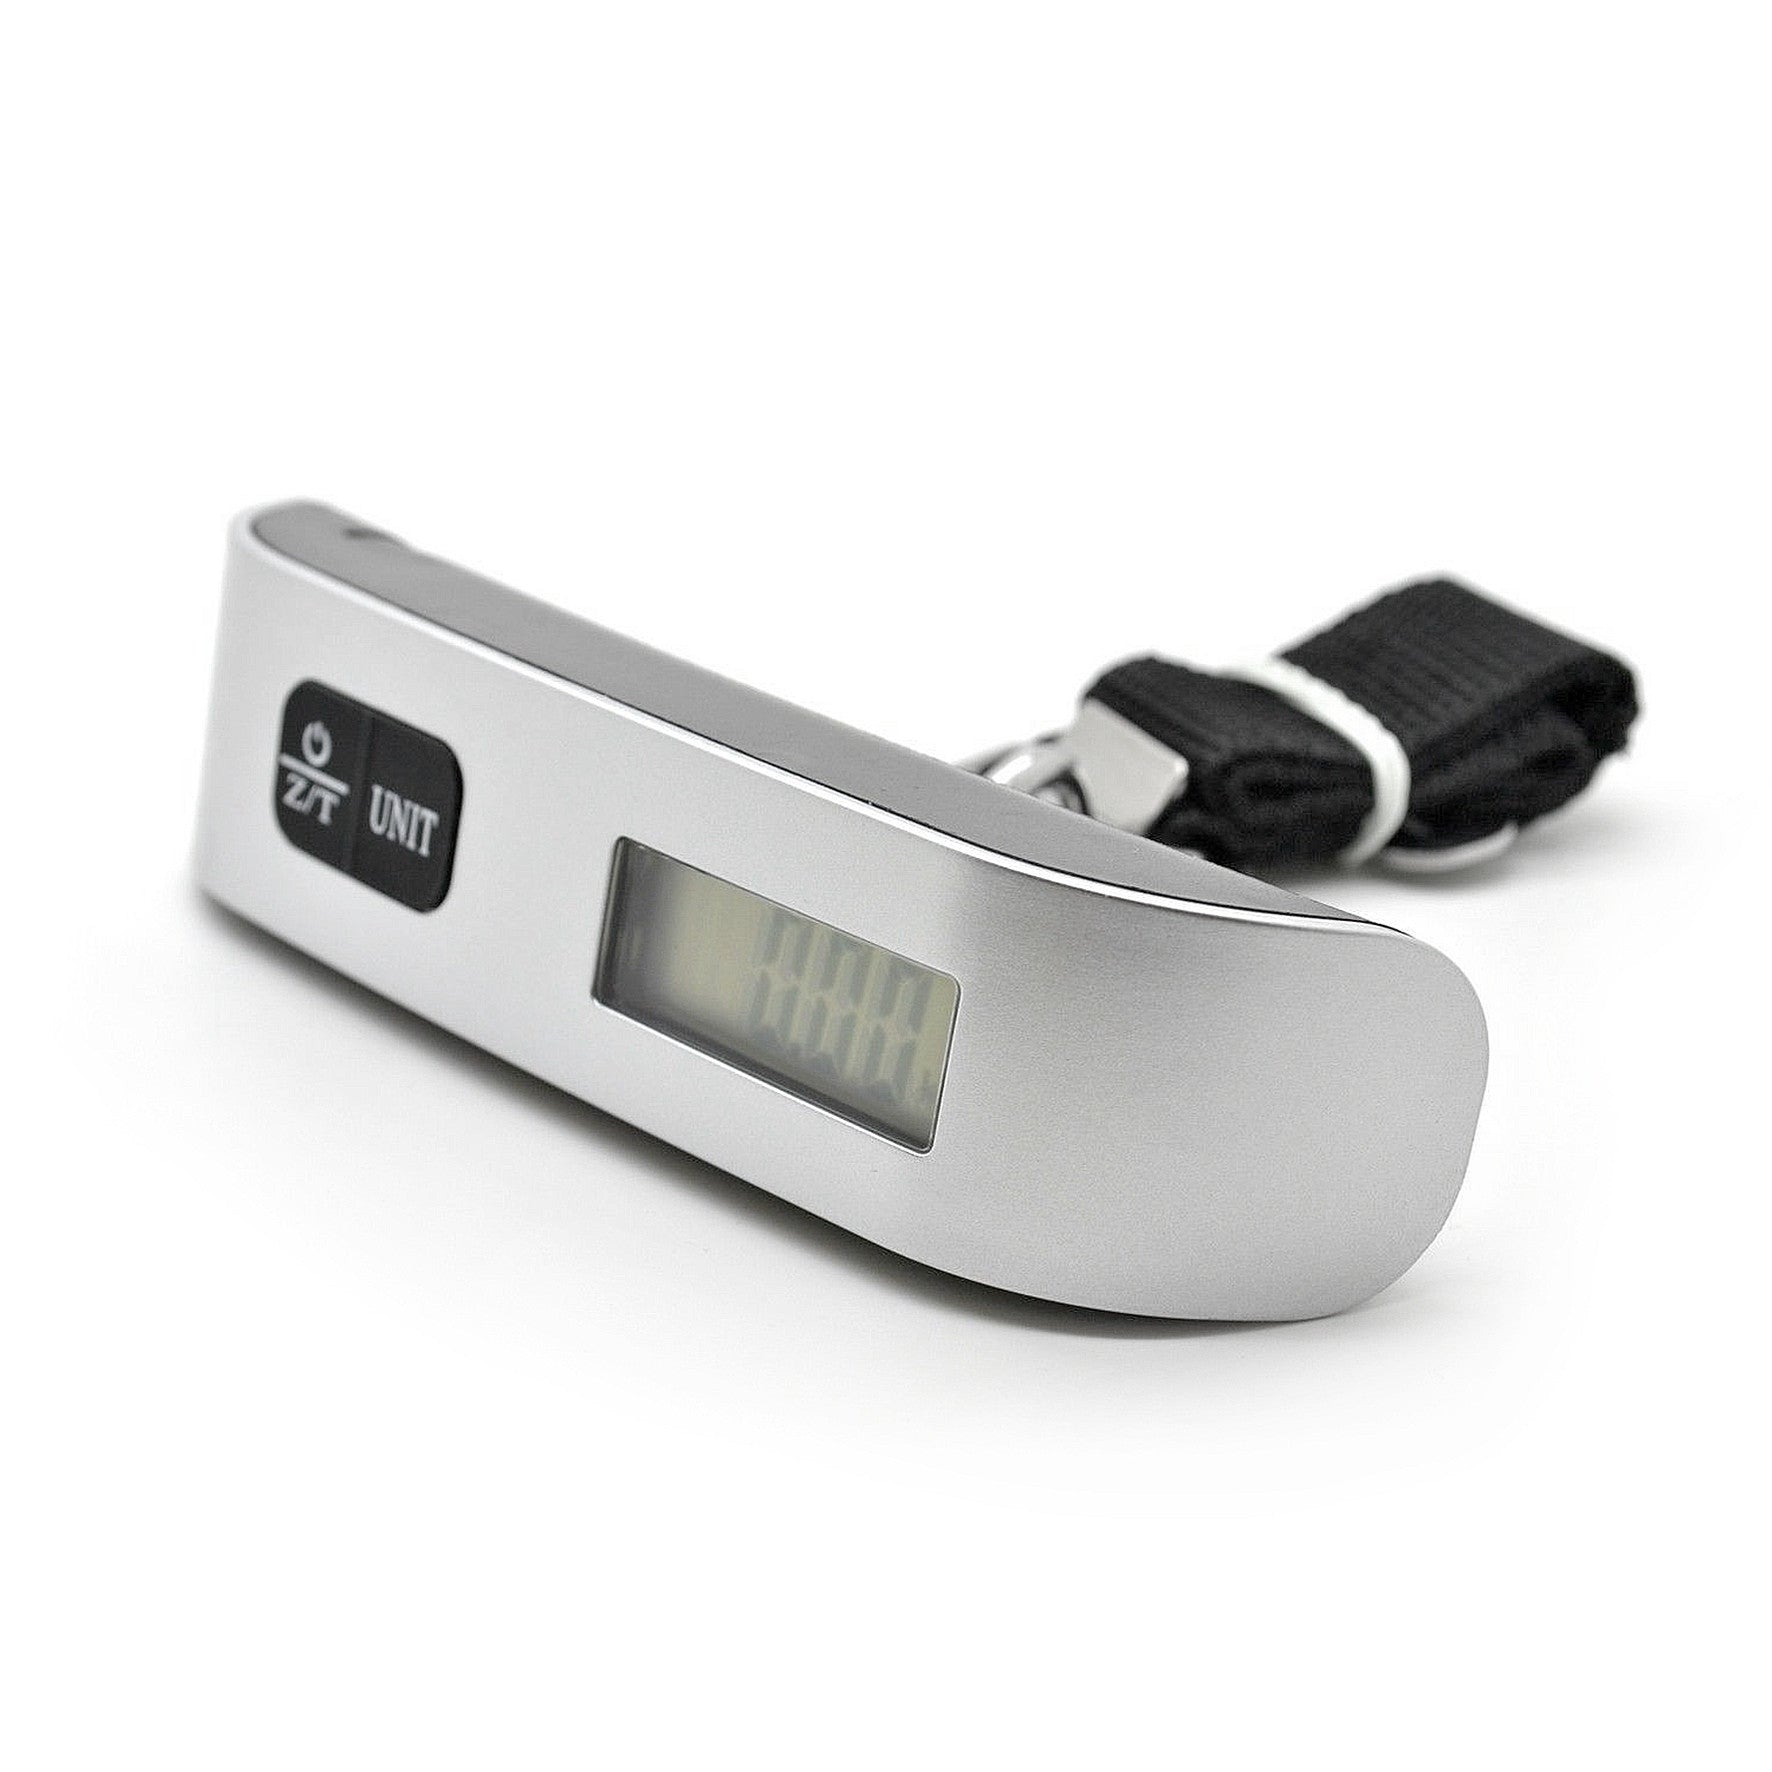 Portable Travel/ Luggage Scale